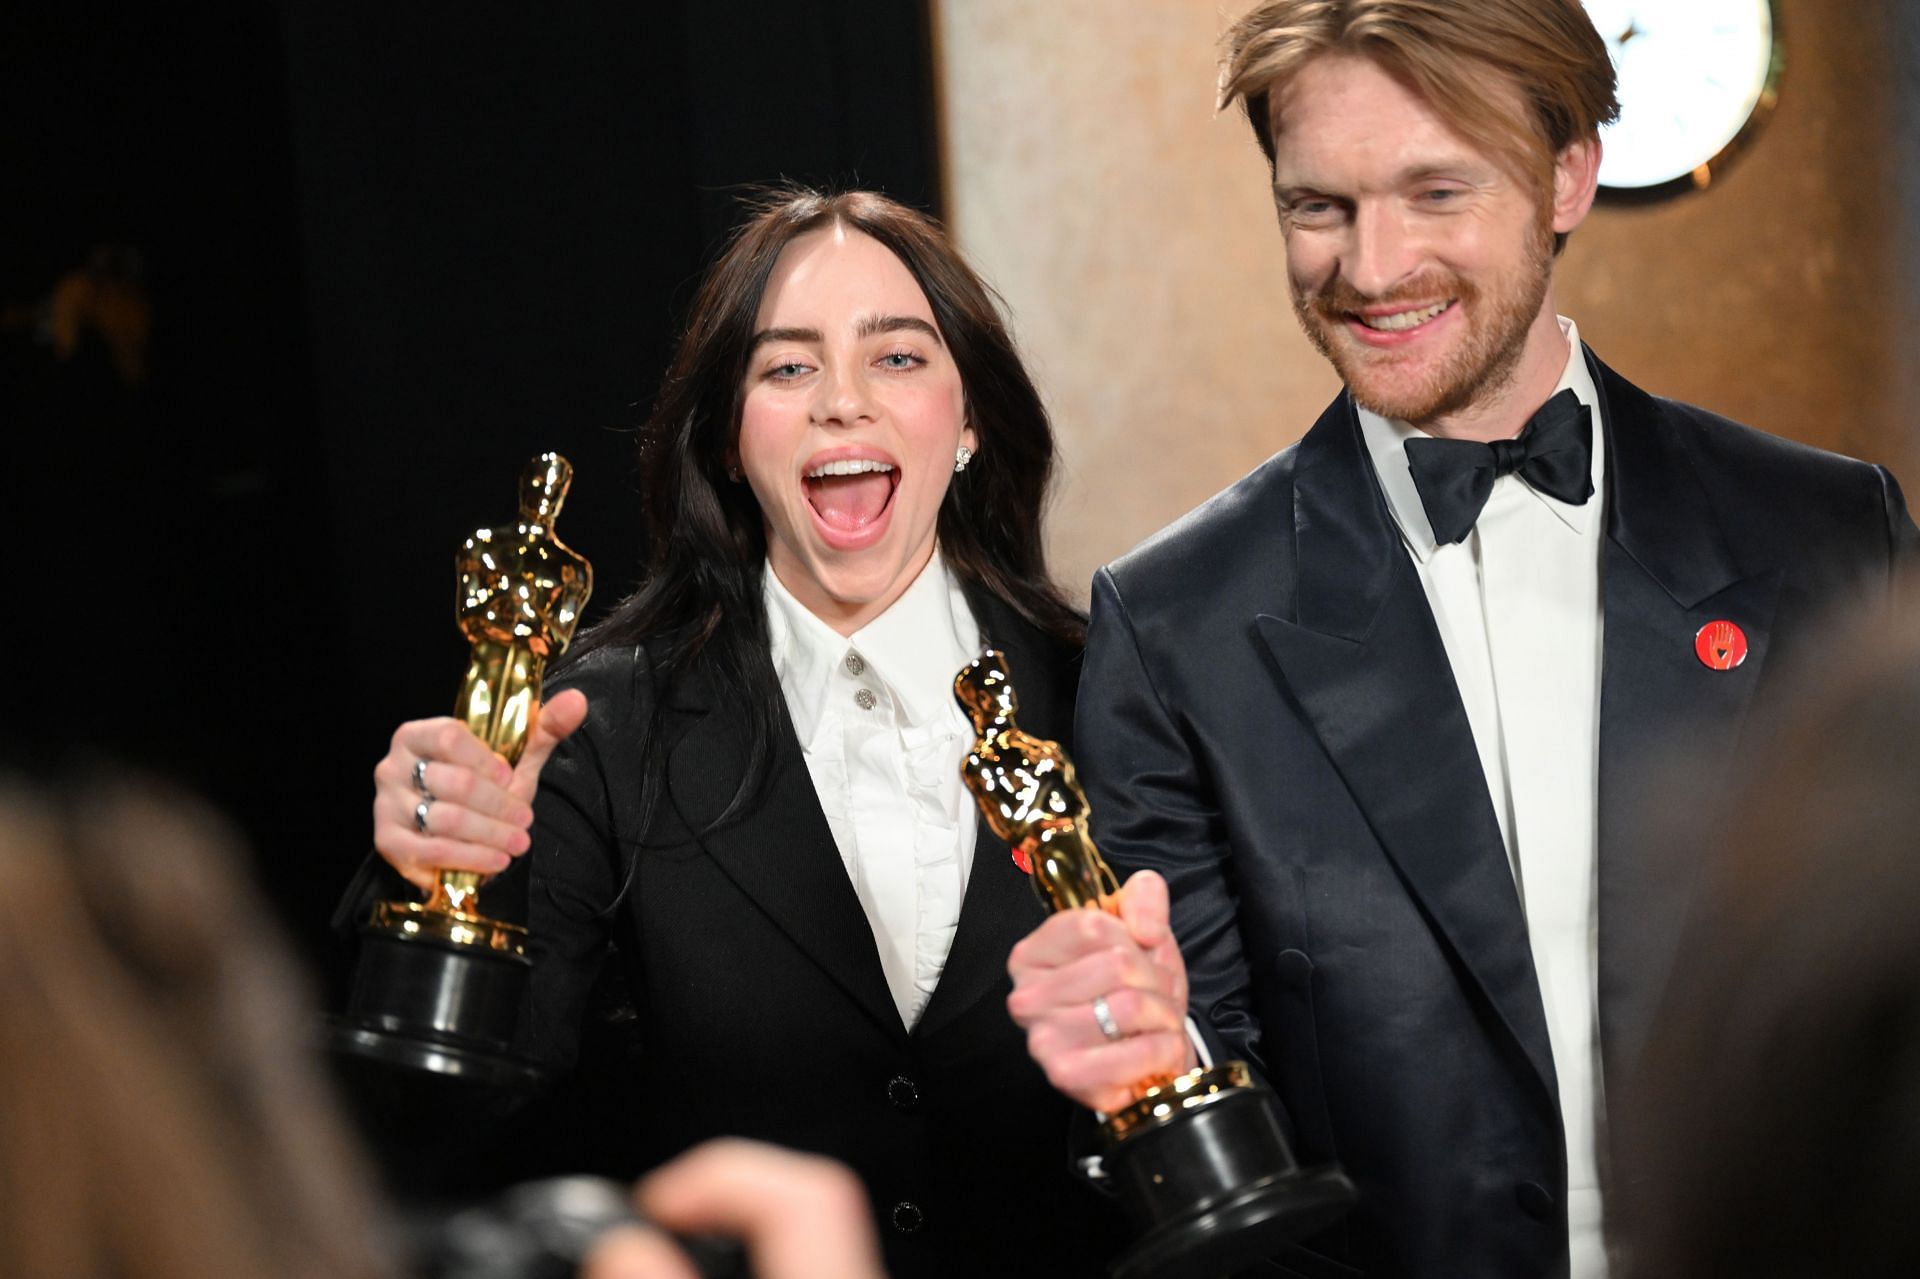 Billie Eilish and Finneas win Best Original Song at the 96th Annual Academy Awards (Image via Getty Images)